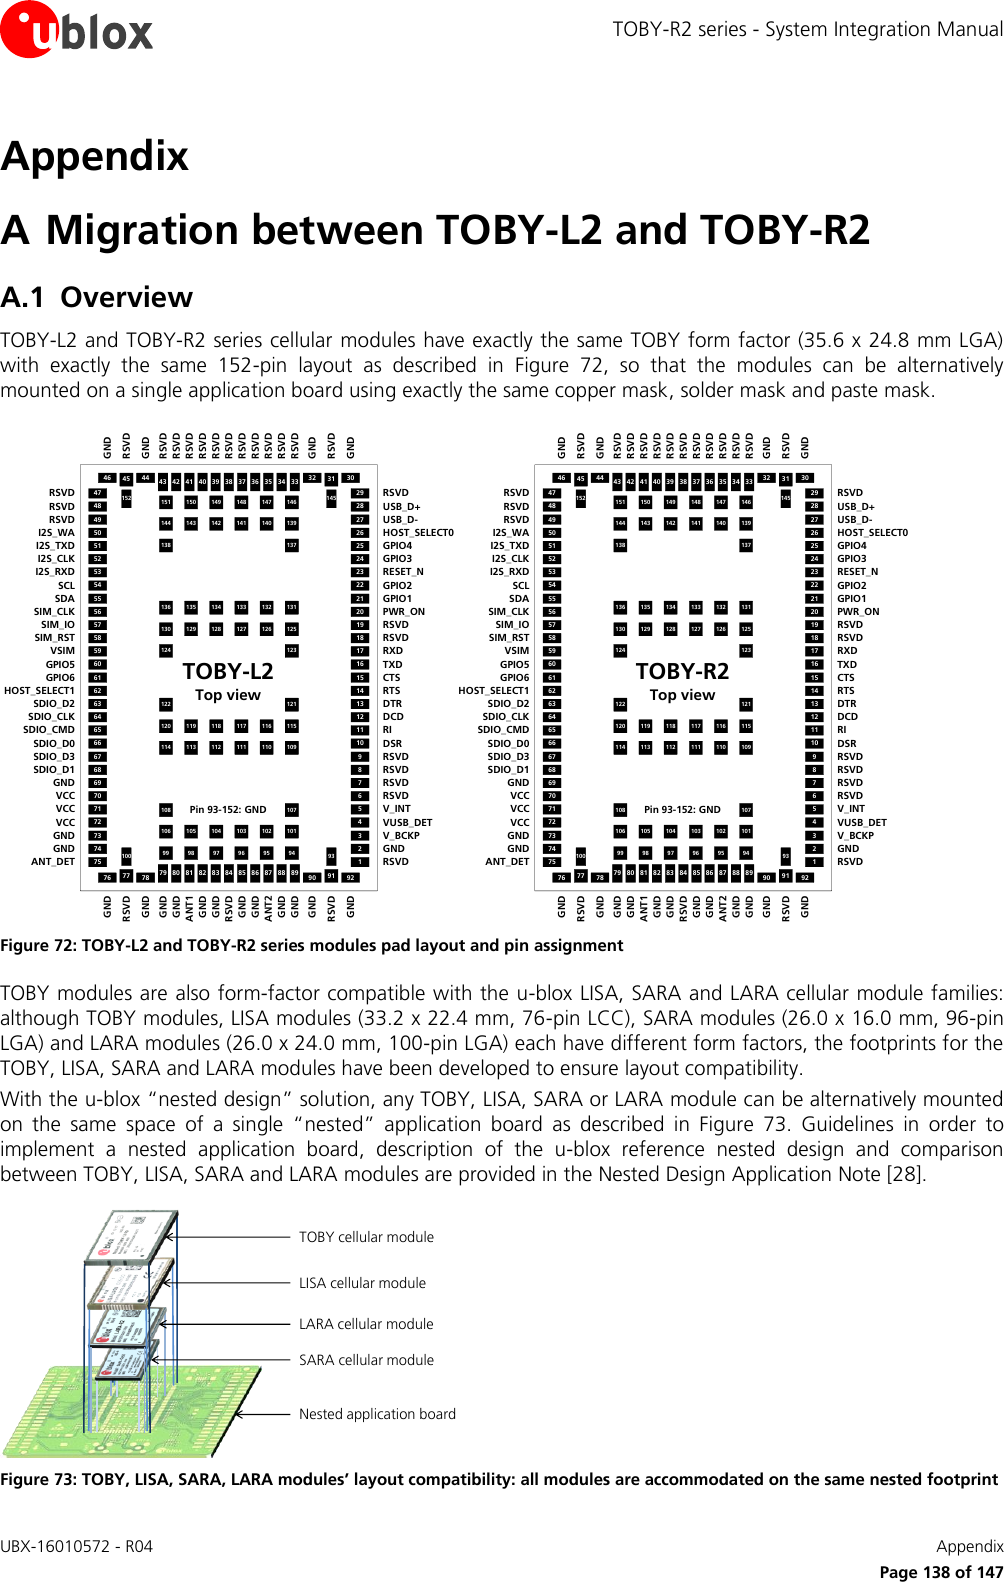 TOBY-R2 series - System Integration Manual UBX-16010572 - R04    Appendix      Page 138 of 147 Appendix A Migration between TOBY-L2 and TOBY-R2 A.1 Overview TOBY-L2 and TOBY-R2 series cellular modules have exactly the same TOBY form factor (35.6 x 24.8 mm LGA) with  exactly  the  same  152-pin  layout  as  described  in  Figure  72,  so  that  the  modules  can  be  alternatively mounted on a single application board using exactly the same copper mask, solder mask and paste mask. 11107542121191816151312292726242386322201714282596566697172747555575860616364474950525368707354565962485167SDIO_CMDSDIO_D0GNDVCCVCCGNDANT_DETSDASIM_IOSIM_RSTGPIO5GPIO6SDIO_D2SDIO_CLKRSVDRSVDI2S_WAI2S_CLKI2S_RXDSDIO_D1VCCGNDSCLSIM_CLKVSIMHOST_SELECT1RSVDI2S_TXDSDIO_D3RIDSRRSVDV_INTVUSB_DETGNDRSVDGPIO1RSVDRSVDTXDCTSDTRDCDRSVDUSB_D-HOST_SELECT0GPIO3RESET_NRSVDRSVDV_BCKPGPIO2PWR_ONRXDRTSUSB_D+GPIO4RSVD90 91 927877769310079 80 83 85 86 88 8982 84 8781GNDRSVDGNDGNDRSVDGNDGNDGNDGNDGNDGNDGNDGNDGNDRSVDANT2ANT132 31 3044454614515243 42 39 37 36 34 3340 38 3541GNDRSVDGNDGNDRSVDGNDRSVDRSVDRSVDRSVDRSVDRSVDRSVDRSVDRSVDRSVDRSVD99 98 97 96 95 94106 105 104 103 102 101108 107124 123130 129 128 127 126 125136 135 134 133 132 131138 137144 143 142 141 140 139151 150 149 148 147 146114 113 112 111 110 109120 119 118 117 116 115122 121Pin 93-152: GNDTOBY-R2Top view11107542121191816151312292726242386322201714282596566697172747555575860616364474950525368707354565962485167SDIO_CMDSDIO_D0GNDVCCVCCGNDANT_DETSDASIM_IOSIM_RSTGPIO5GPIO6SDIO_D2SDIO_CLKRSVDRSVDI2S_WAI2S_CLKI2S_RXDSDIO_D1VCCGNDSCLSIM_CLKVSIMHOST_SELECT1RSVDI2S_TXDSDIO_D3RIDSRRSVDV_INTVUSB_DETGNDRSVDGPIO1RSVDRSVDTXDCTSDTRDCDRSVDUSB_D-HOST_SELECT0GPIO3RESET_NRSVDRSVDV_BCKPGPIO2PWR_ONRXDRTSUSB_D+GPIO4RSVD90 91 927877769310079 80 83 85 86 88 8982 84 8781GNDRSVDGNDGNDRSVDGNDGNDGNDGNDGNDGNDGNDGNDGNDRSVDANT2ANT132 31 3044454614515243 42 39 37 36 34 3340 38 3541GNDRSVDGNDGNDRSVDGNDRSVDRSVDRSVDRSVDRSVDRSVDRSVDRSVDRSVDRSVDRSVD99 98 97 96 95 94106 105 104 103 102 101108 107124 123130 129 128 127 126 125136 135 134 133 132 131138 137144 143 142 141 140 139151 150 149 148 147 146114 113 112 111 110 109120 119 118 117 116 115122 121Pin 93-152: GNDTOBY-L2Top view Figure 72: TOBY-L2 and TOBY-R2 series modules pad layout and pin assignment TOBY modules are also form-factor compatible with the u-blox LISA, SARA and LARA cellular module families: although TOBY modules, LISA modules (33.2 x 22.4 mm, 76-pin LCC), SARA modules (26.0 x 16.0 mm, 96-pin LGA) and LARA modules (26.0 x 24.0 mm, 100-pin LGA) each have different form factors, the footprints for the TOBY, LISA, SARA and LARA modules have been developed to ensure layout compatibility. With the u-blox “nested design” solution, any TOBY, LISA, SARA or LARA module can be alternatively mounted on  the  same  space  of  a  single  “nested”  application  board  as  described  in  Figure  73.  Guidelines  in  order  to implement  a  nested  application  board,  description  of  the  u-blox  reference  nested  design  and  comparison between TOBY, LISA, SARA and LARA modules are provided in the Nested Design Application Note [28].  LISA cellular moduleLARA cellular moduleSARA cellular moduleNested application boardTOBY cellular module Figure 73: TOBY, LISA, SARA, LARA modules’ layout compatibility: all modules are accommodated on the same nested footprint 